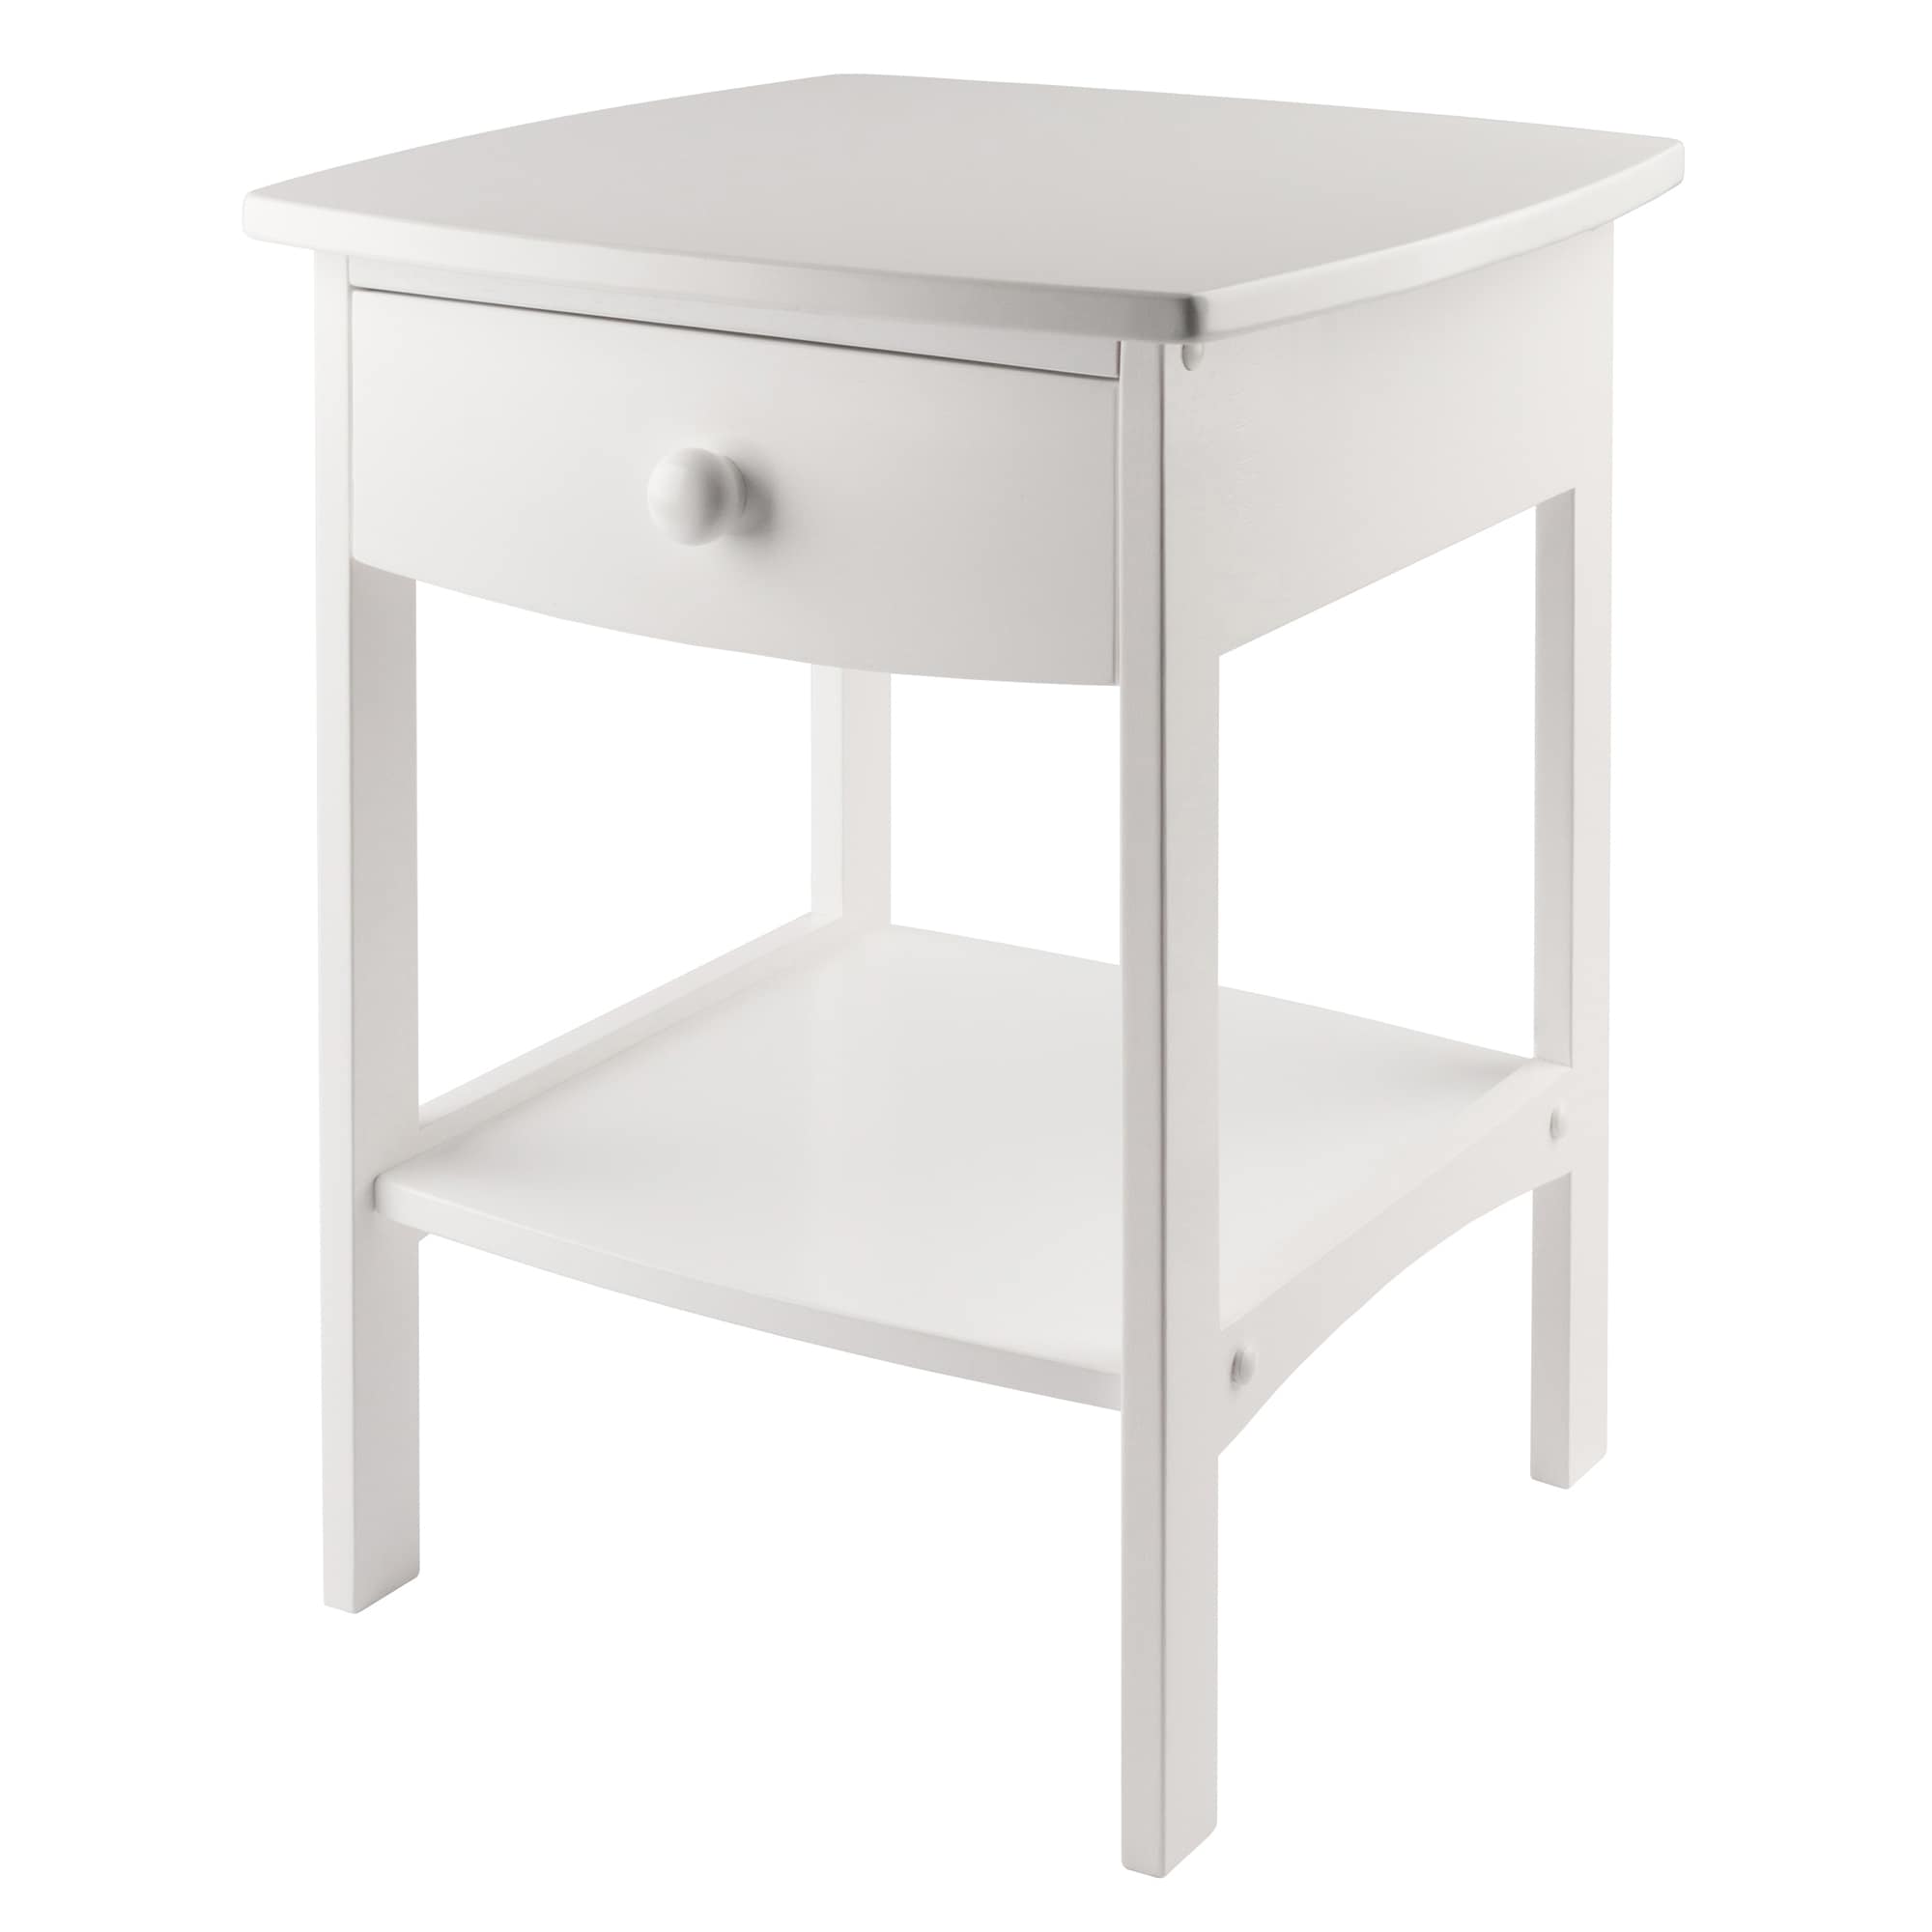 Bonnlo White Nightstand with 2 Drawers, Farmhouse Night Stands